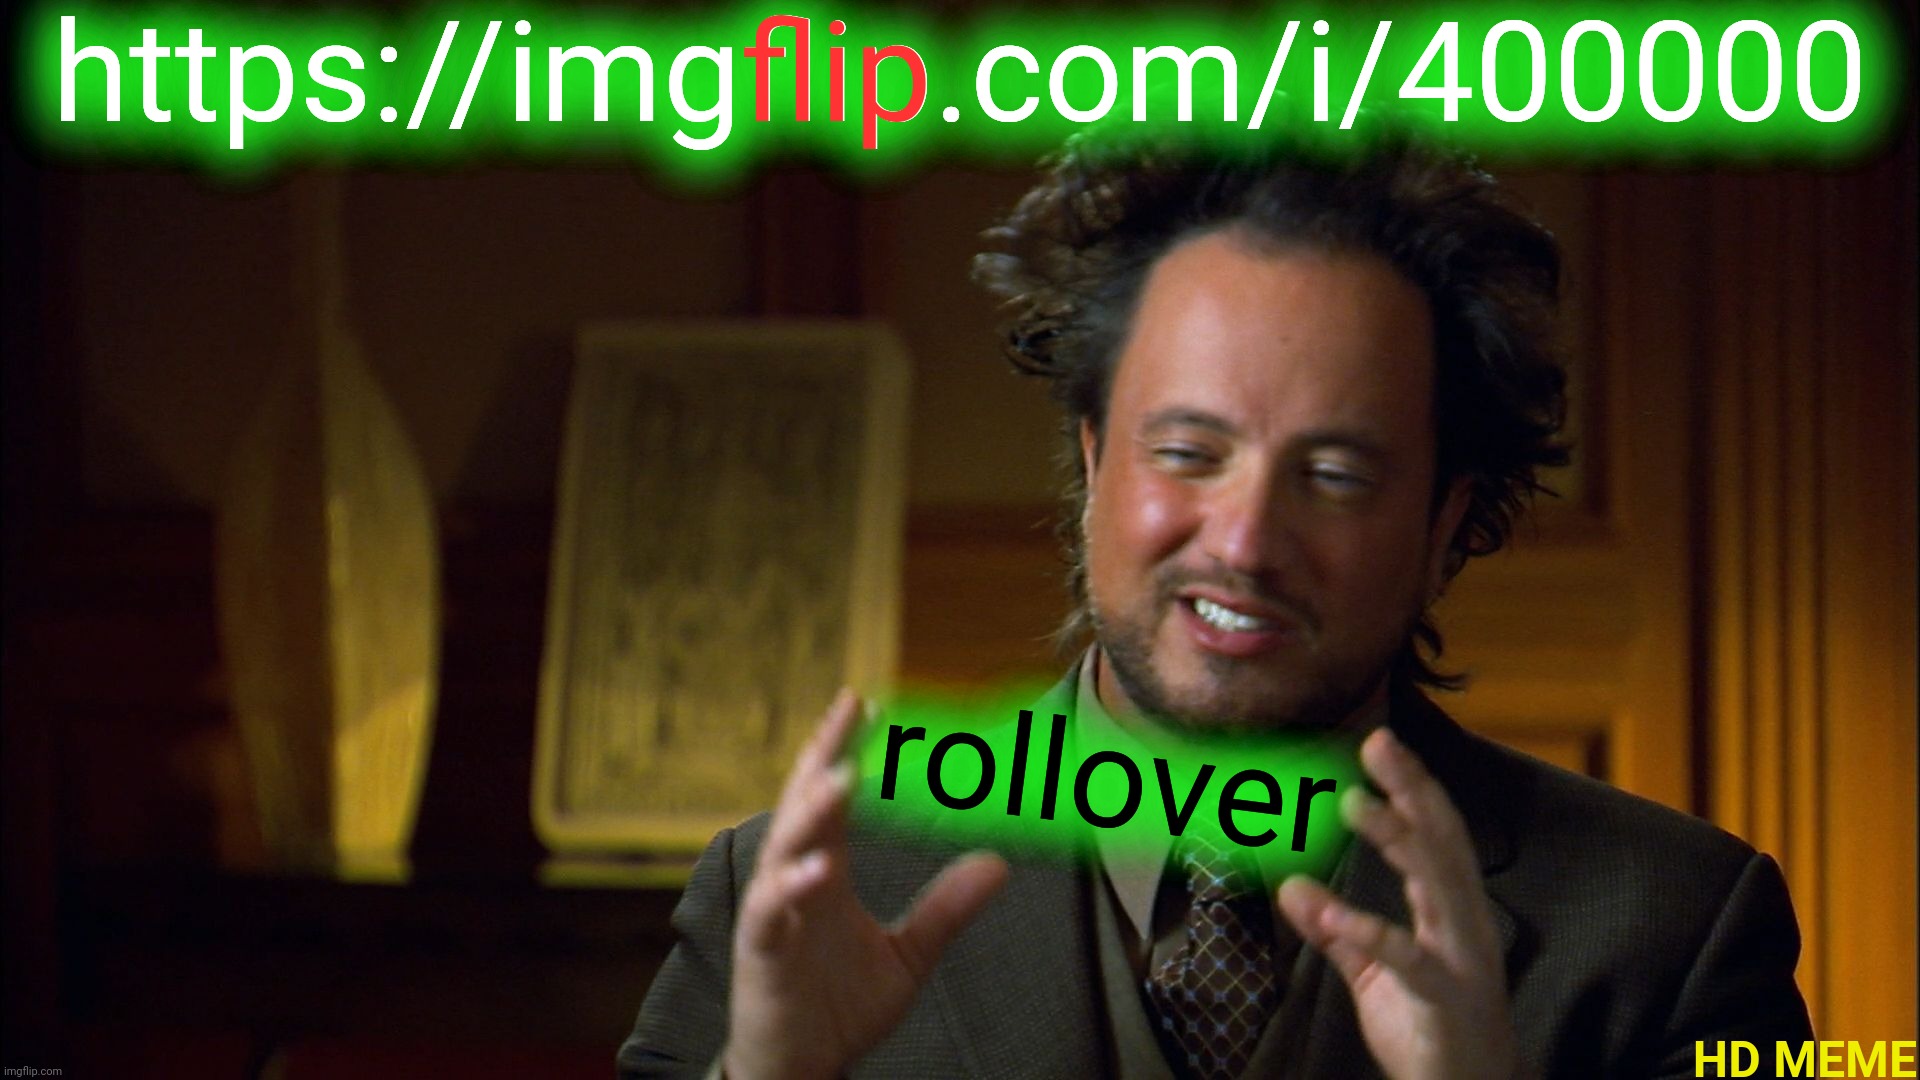 ancient aliens clowns | https://imgflip.com/i/400000; flip; rollover; HD MEME | image tagged in ancient aliens clowns | made w/ Imgflip meme maker